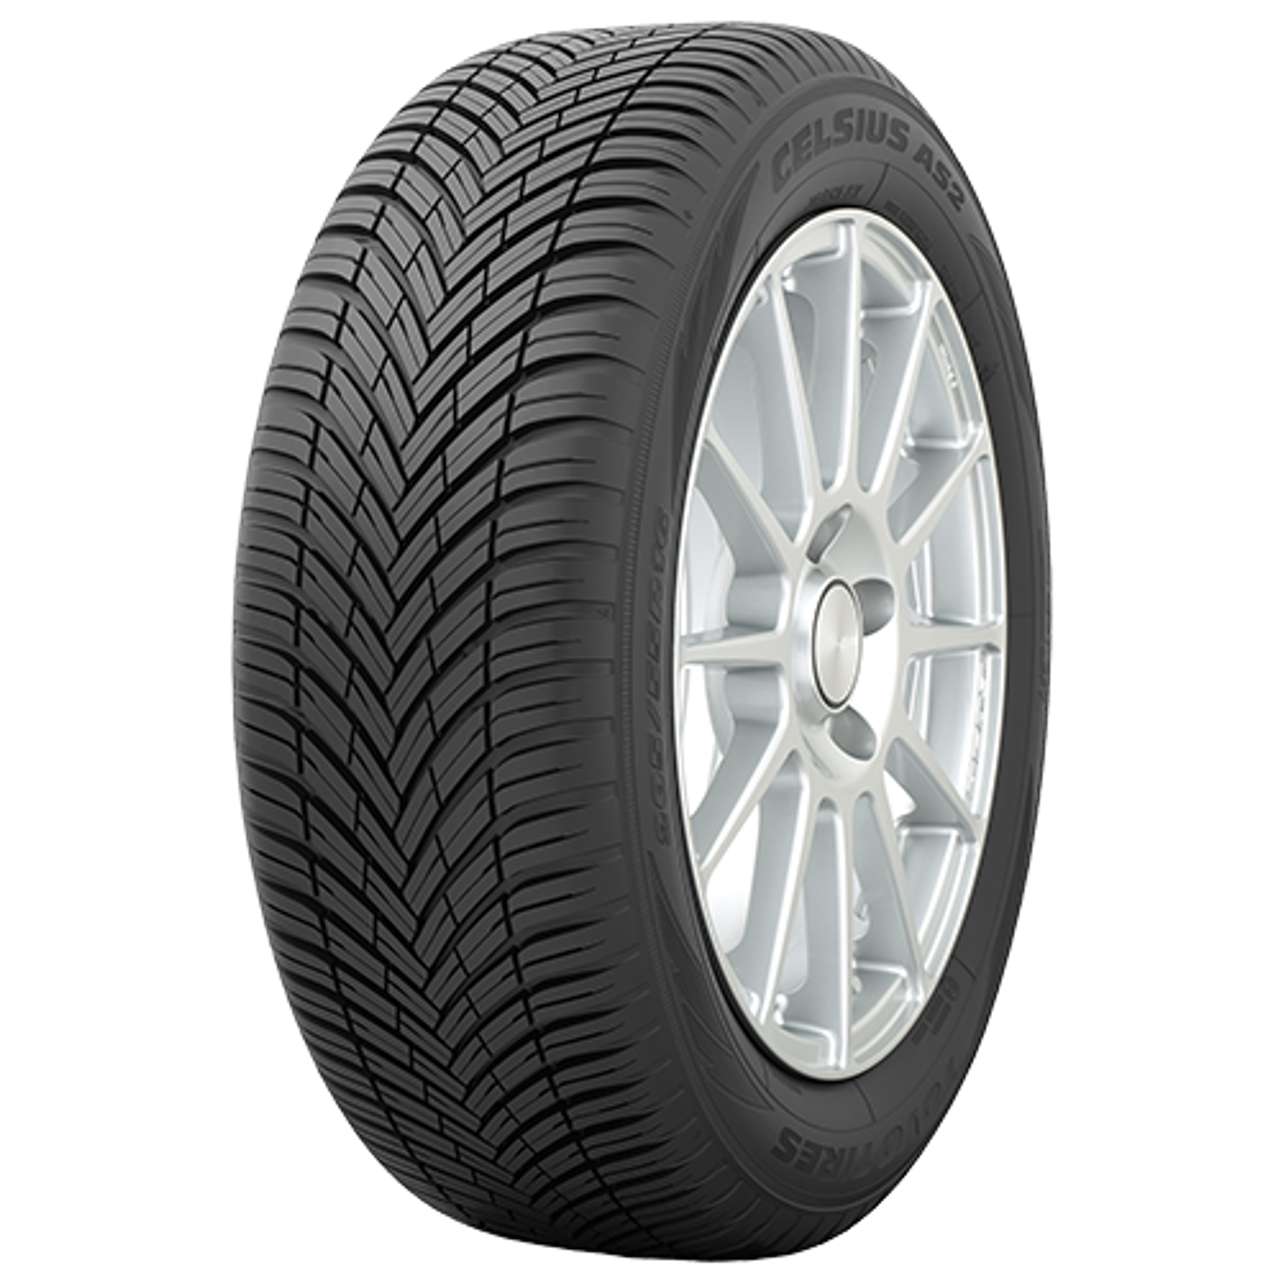 TOYO CELSIUS AS2 215/45R20 95T BSW XL